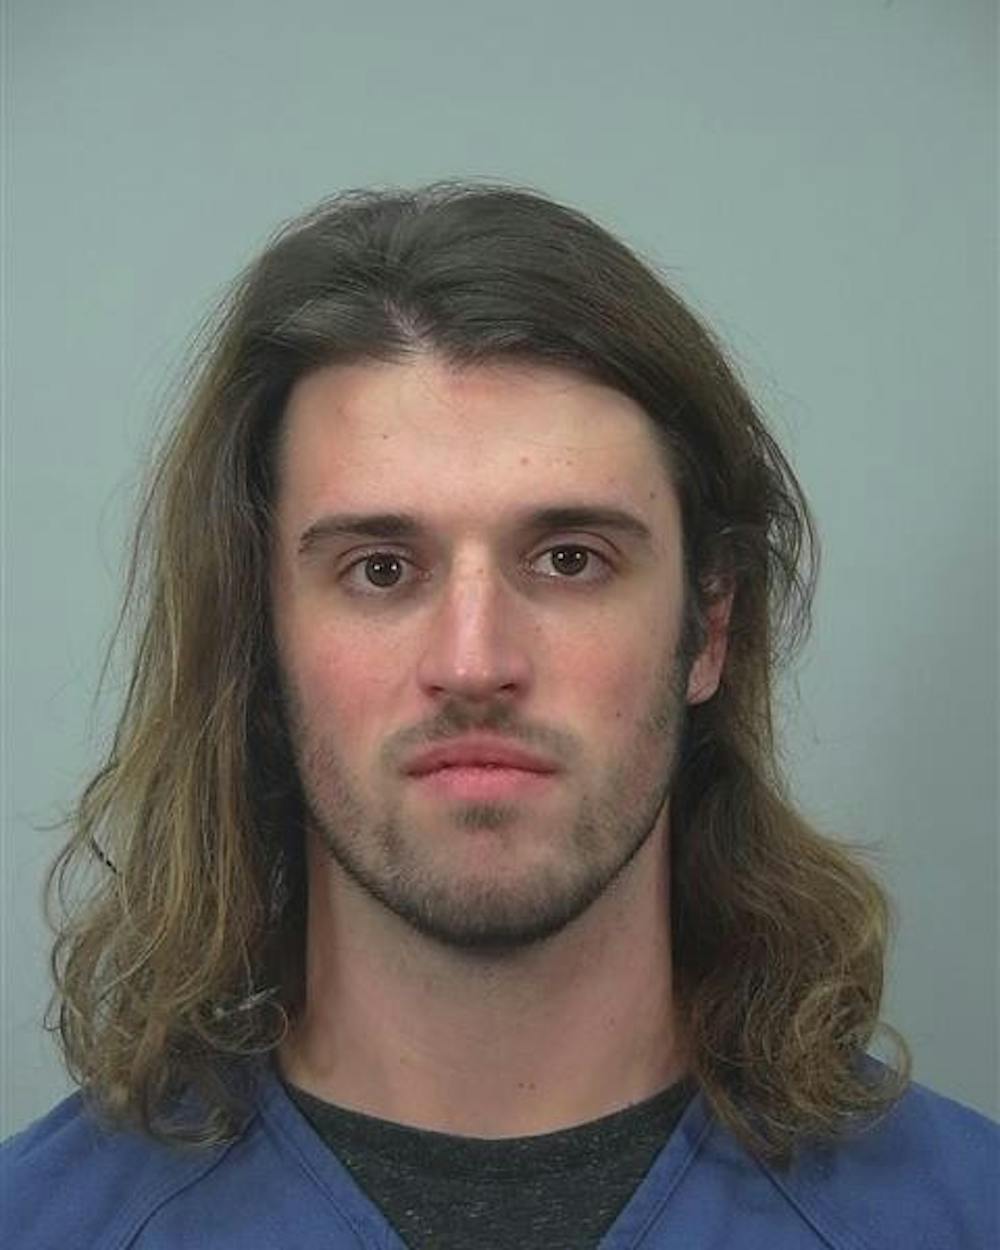 Six additional charges from five different women have been filed against suspended UW-Madison student Alec Cook, bringing his total number of criminal charges to 21.